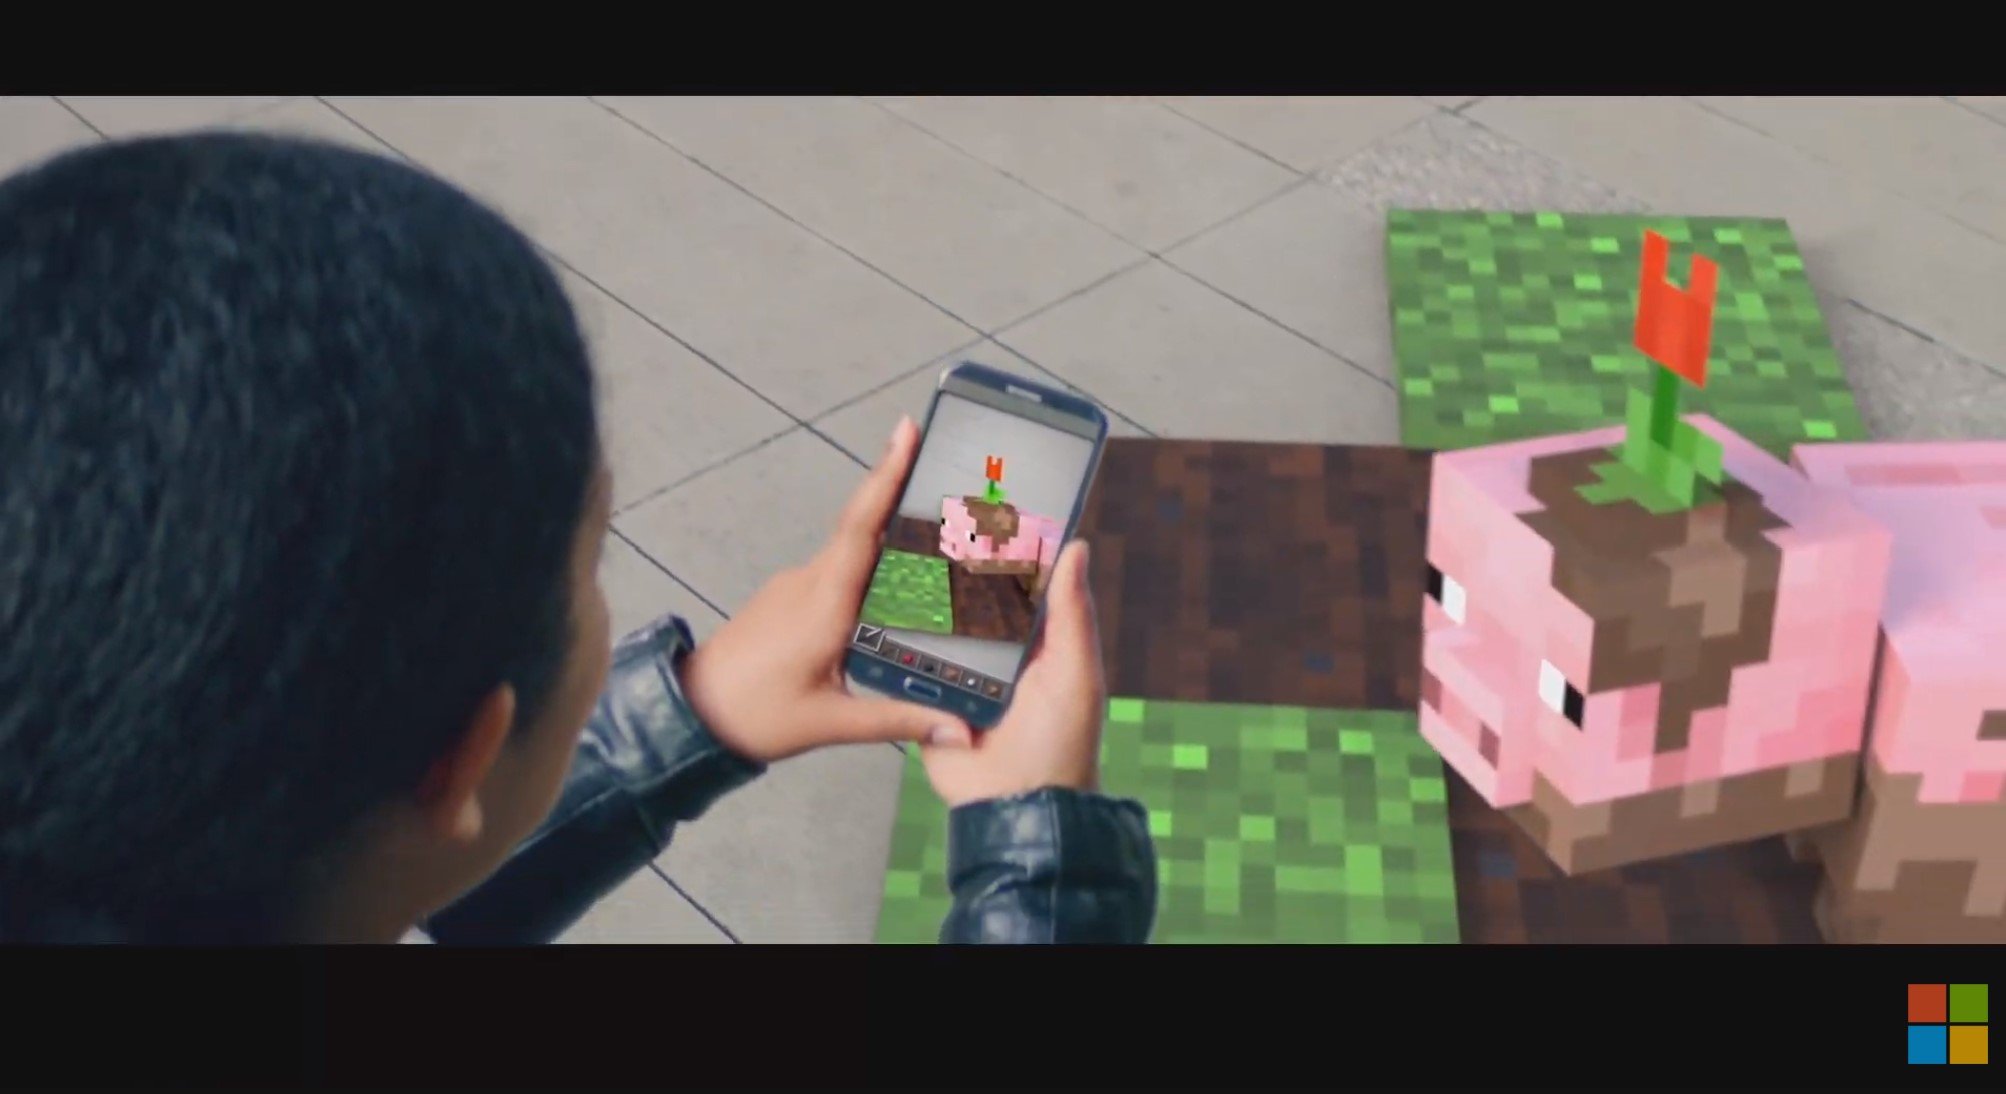 Build 2019: Microsoft teases new Minecraft augmented reality game